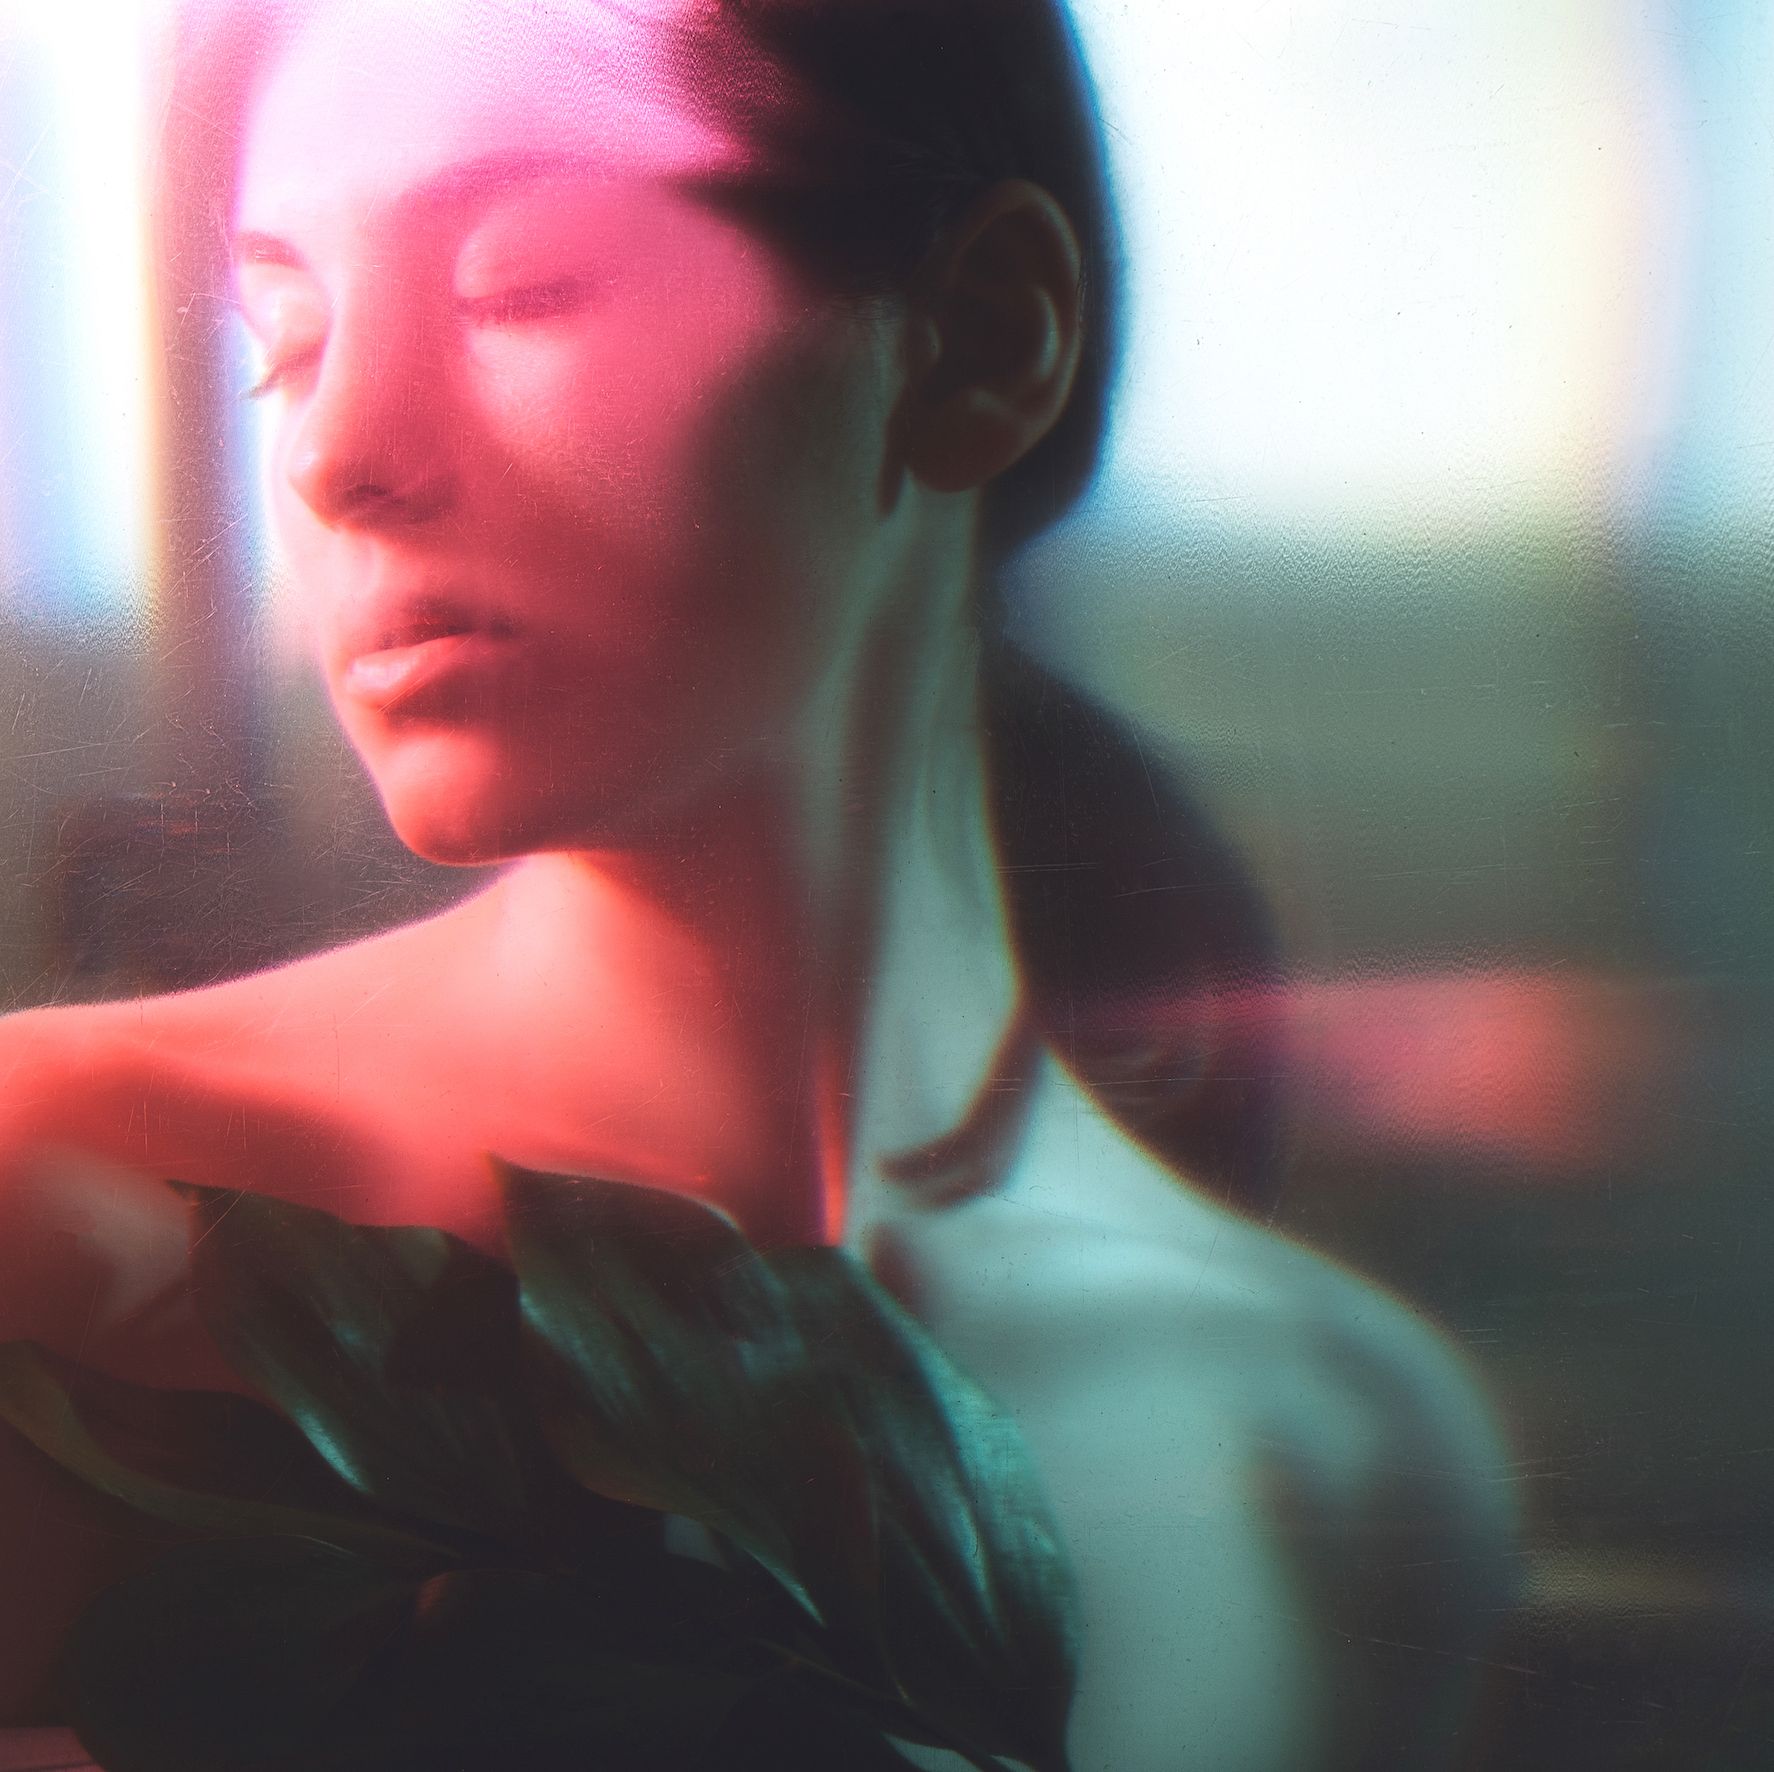 woman with bare shoulders and a blurred silhouette in neon red light to effect tranquility and relaxation